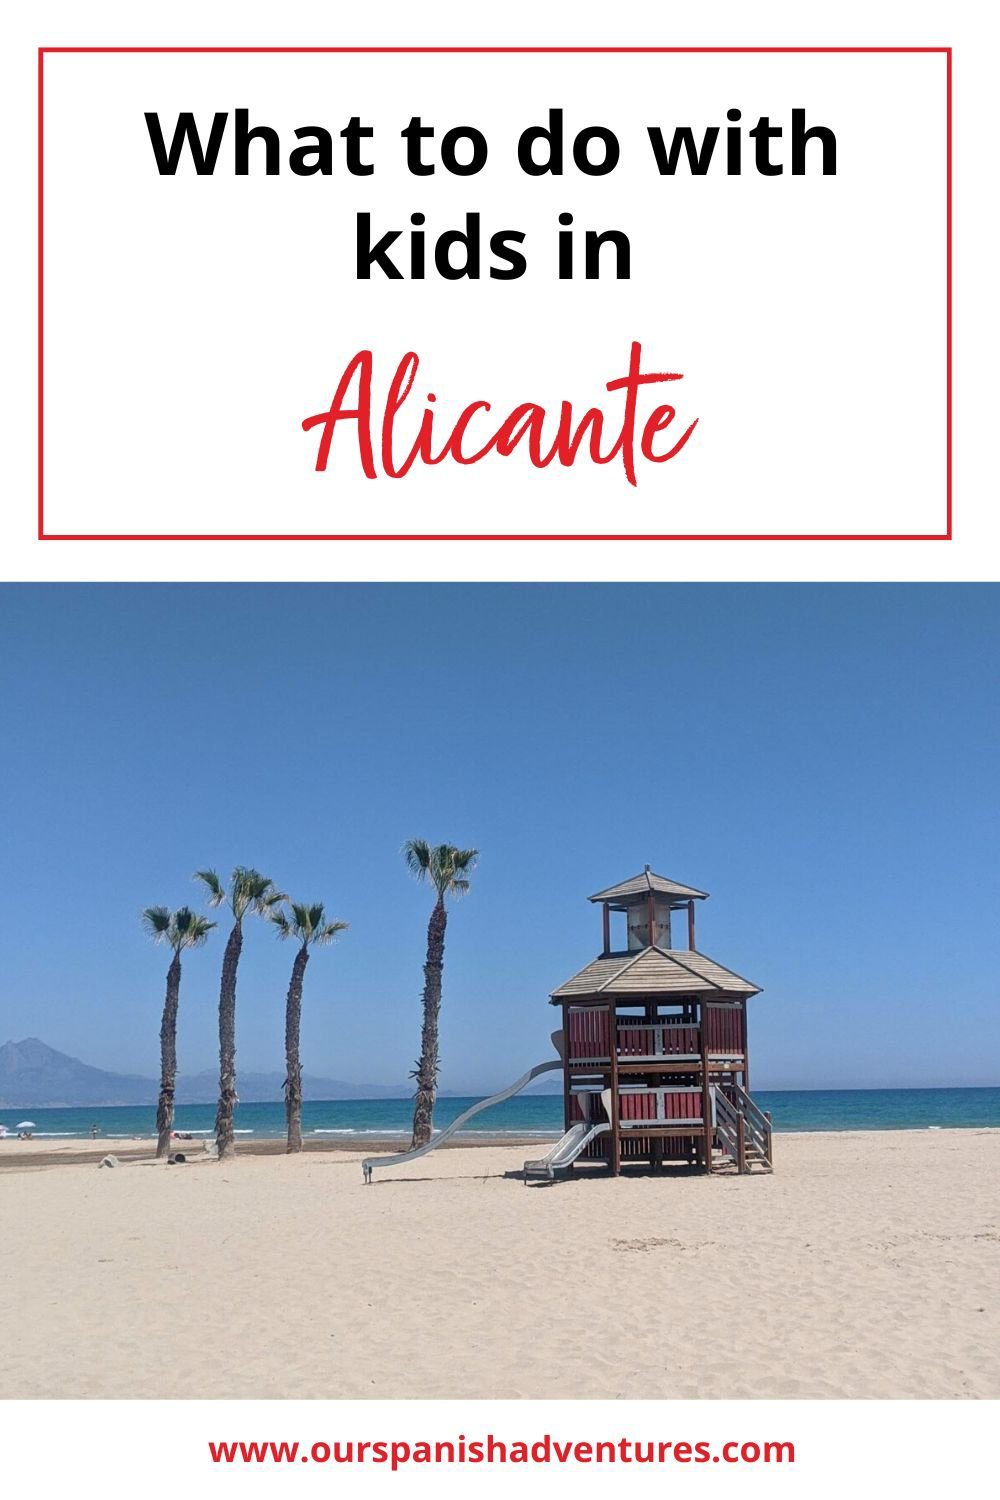 What to do with kids in Alicante | Our Spanish Adventures